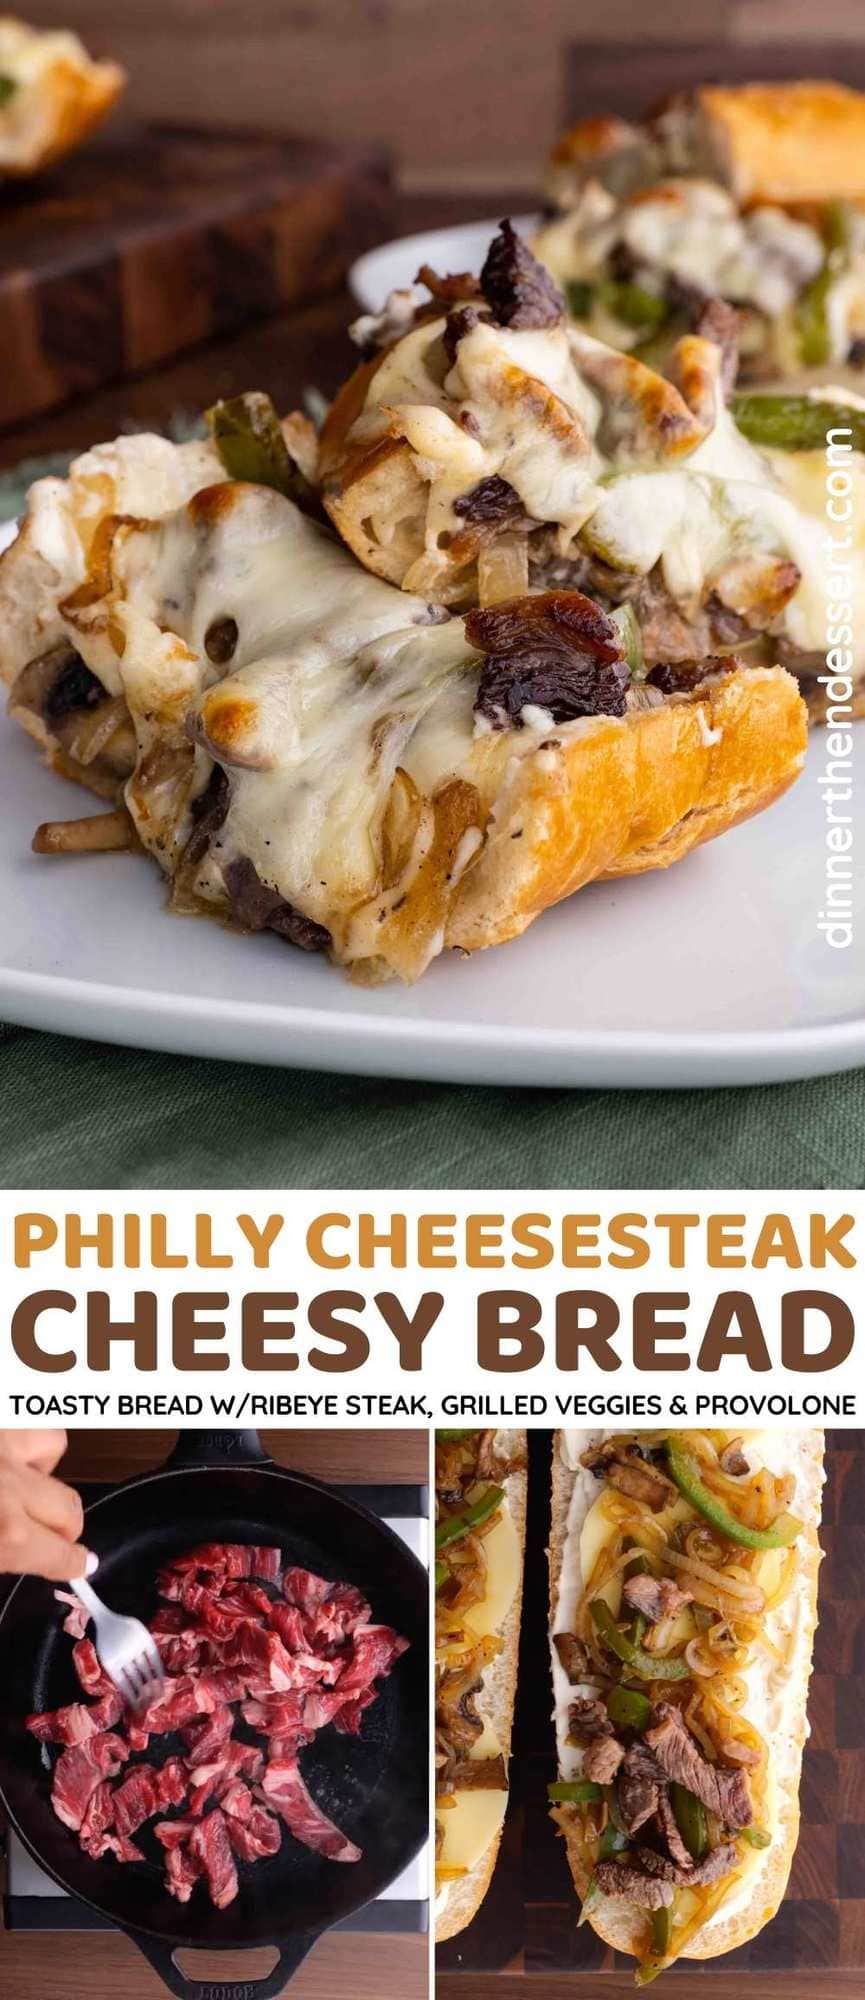 Philly Cheesesteak Cheesy Bread Collage